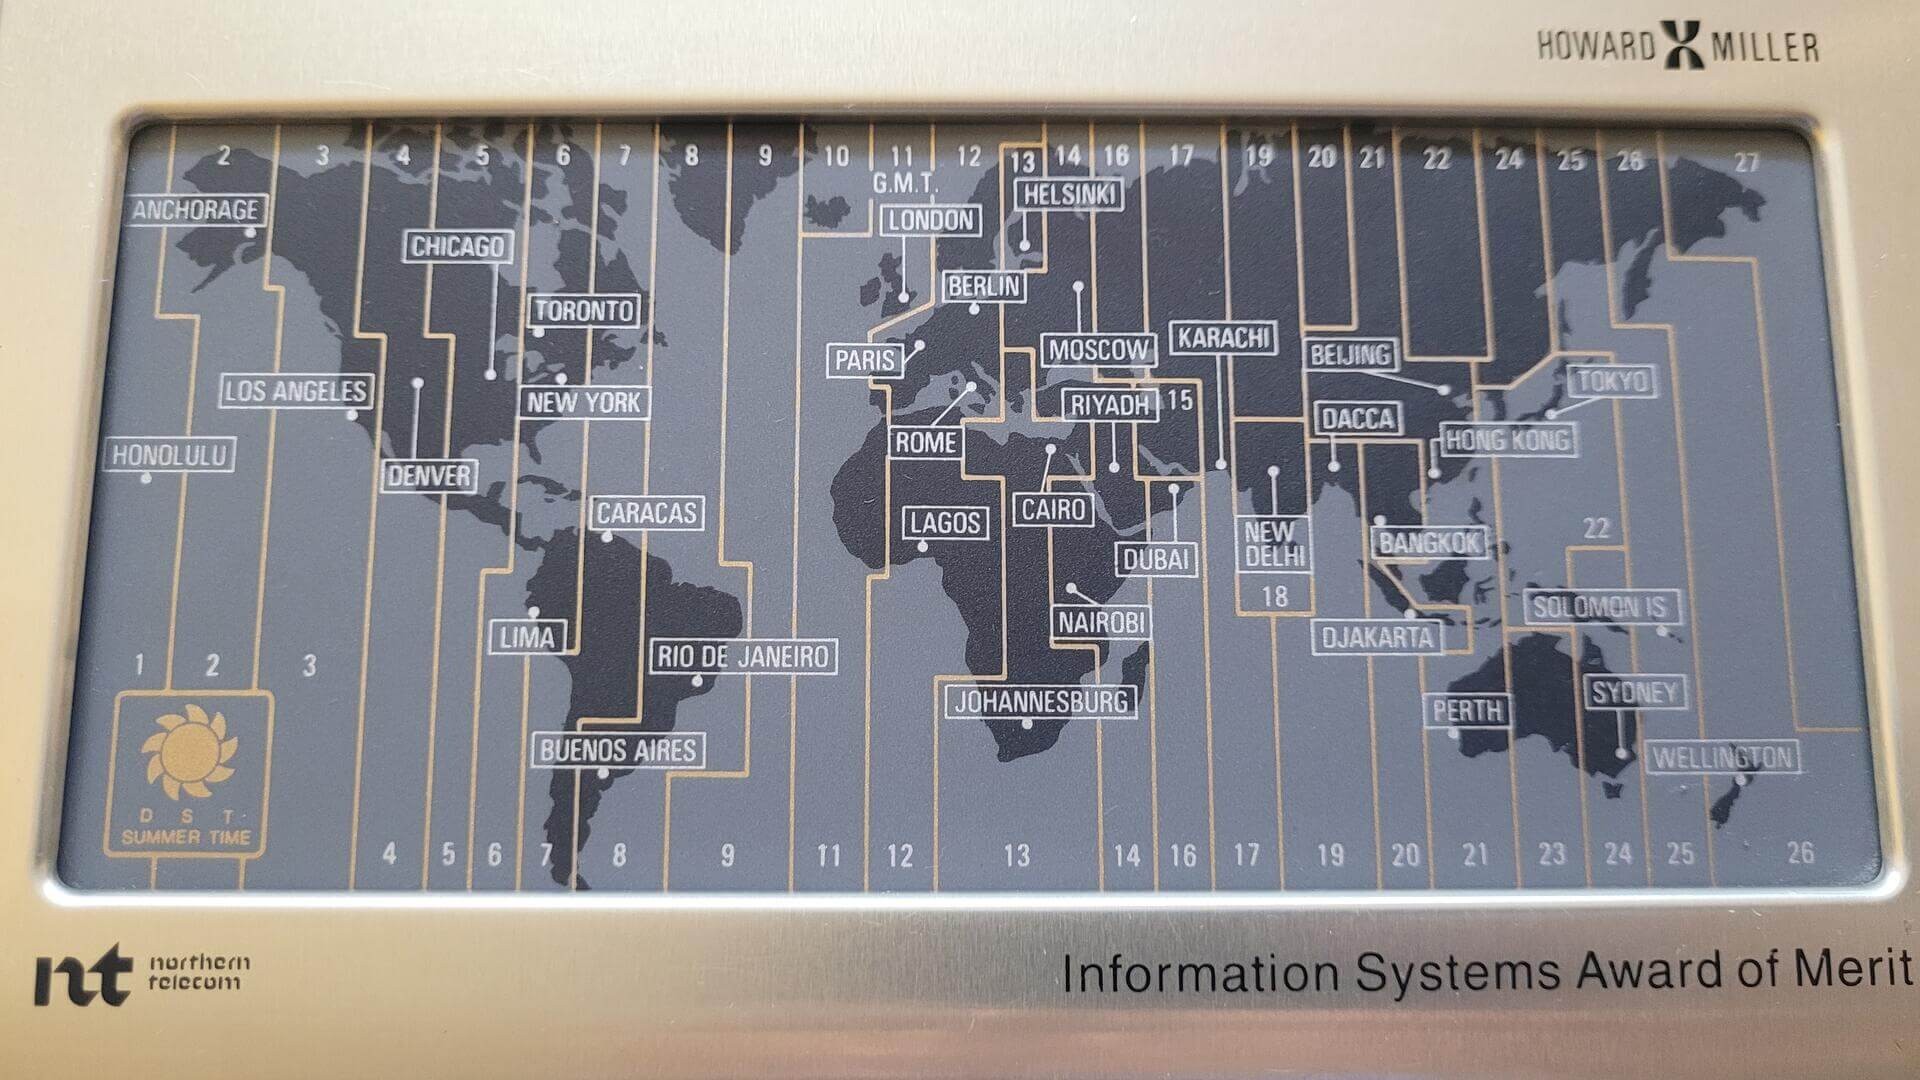 Rare vintage Howard Miller world time touchpad map quartz alarm clock. Retro collectible electronic gadget with the unique feature to set time zones using world map touchpad and a beautiful example of functional and clear user interface design.